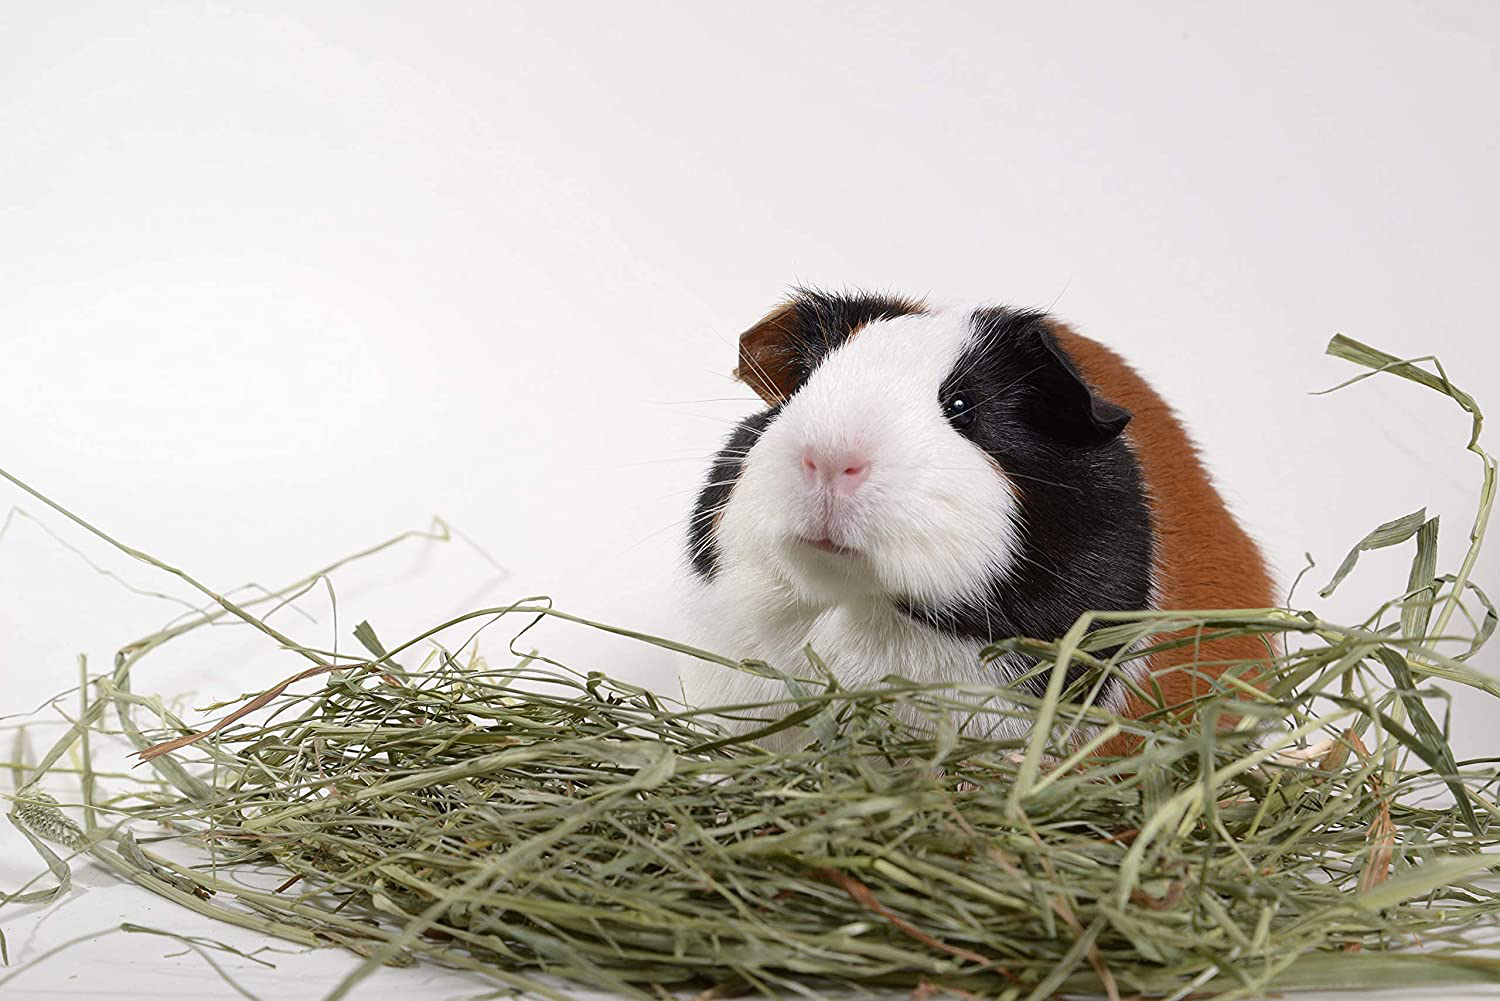 High Desert Timothy Grass Hay for Guinea Pigs, Rabbits, and More Small Animal Pets